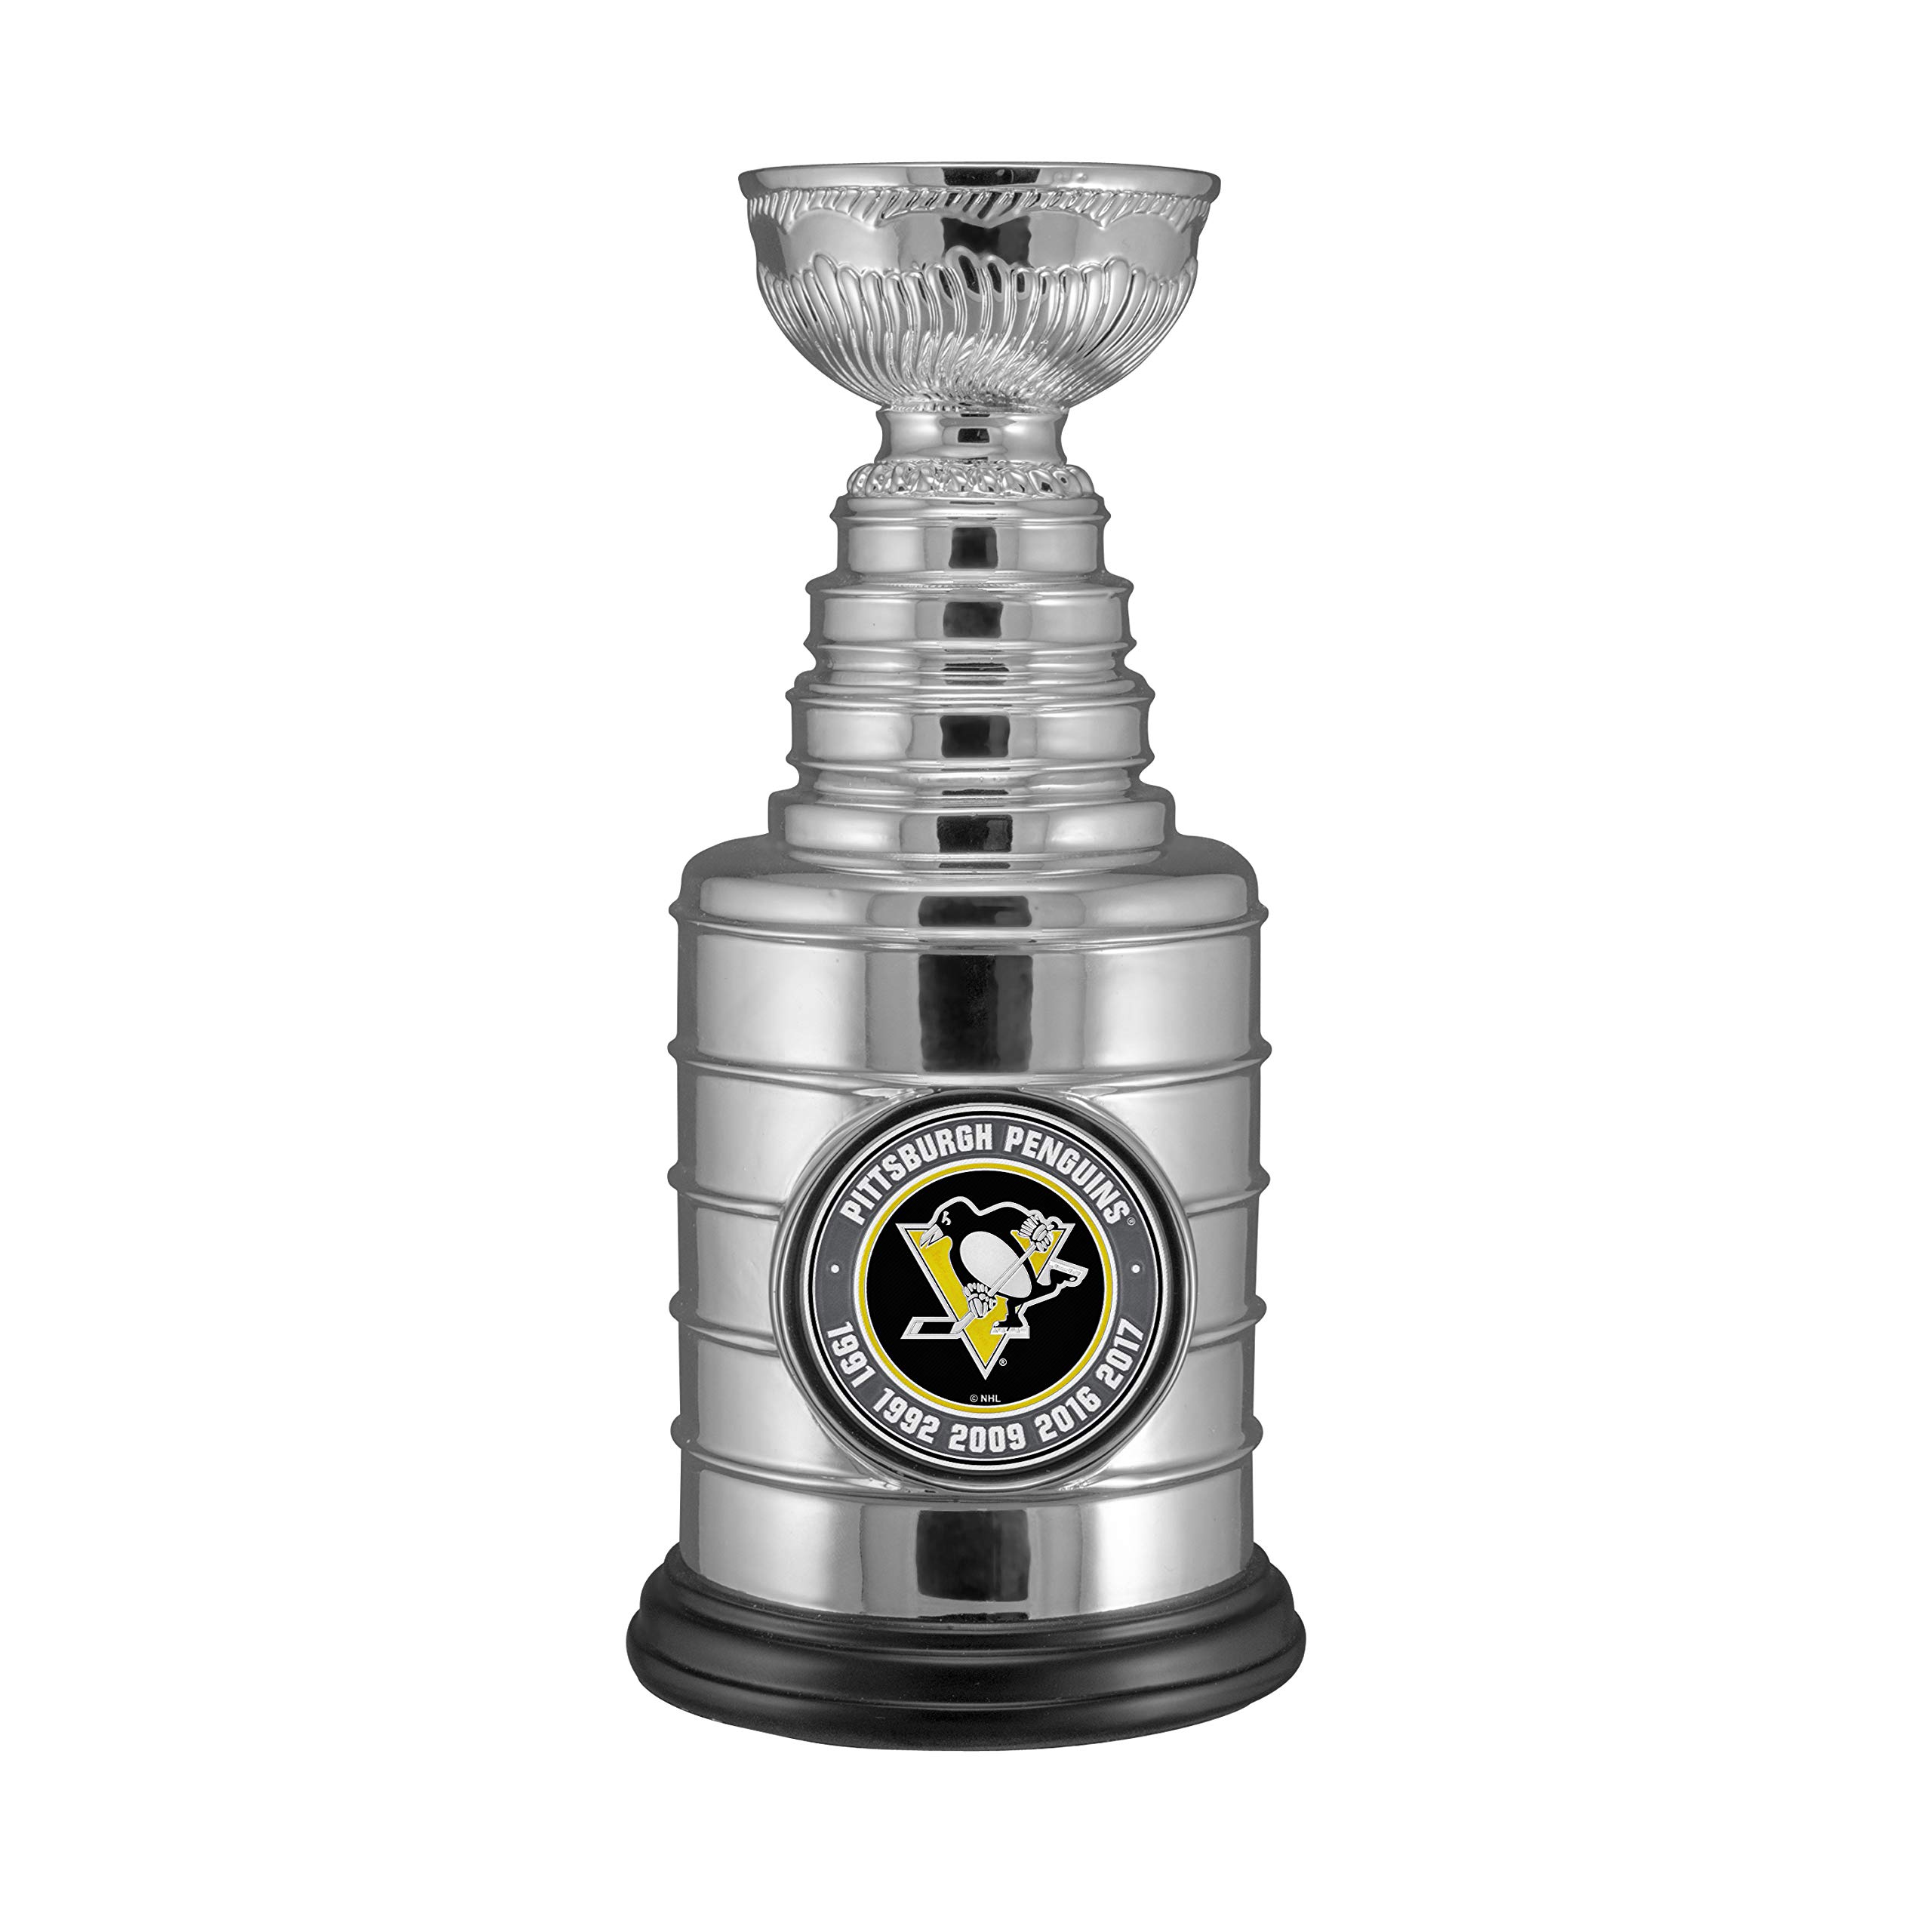 ice hockey - Do Stanley Cup Champions get a replica of the cup? - Sports  Stack Exchange